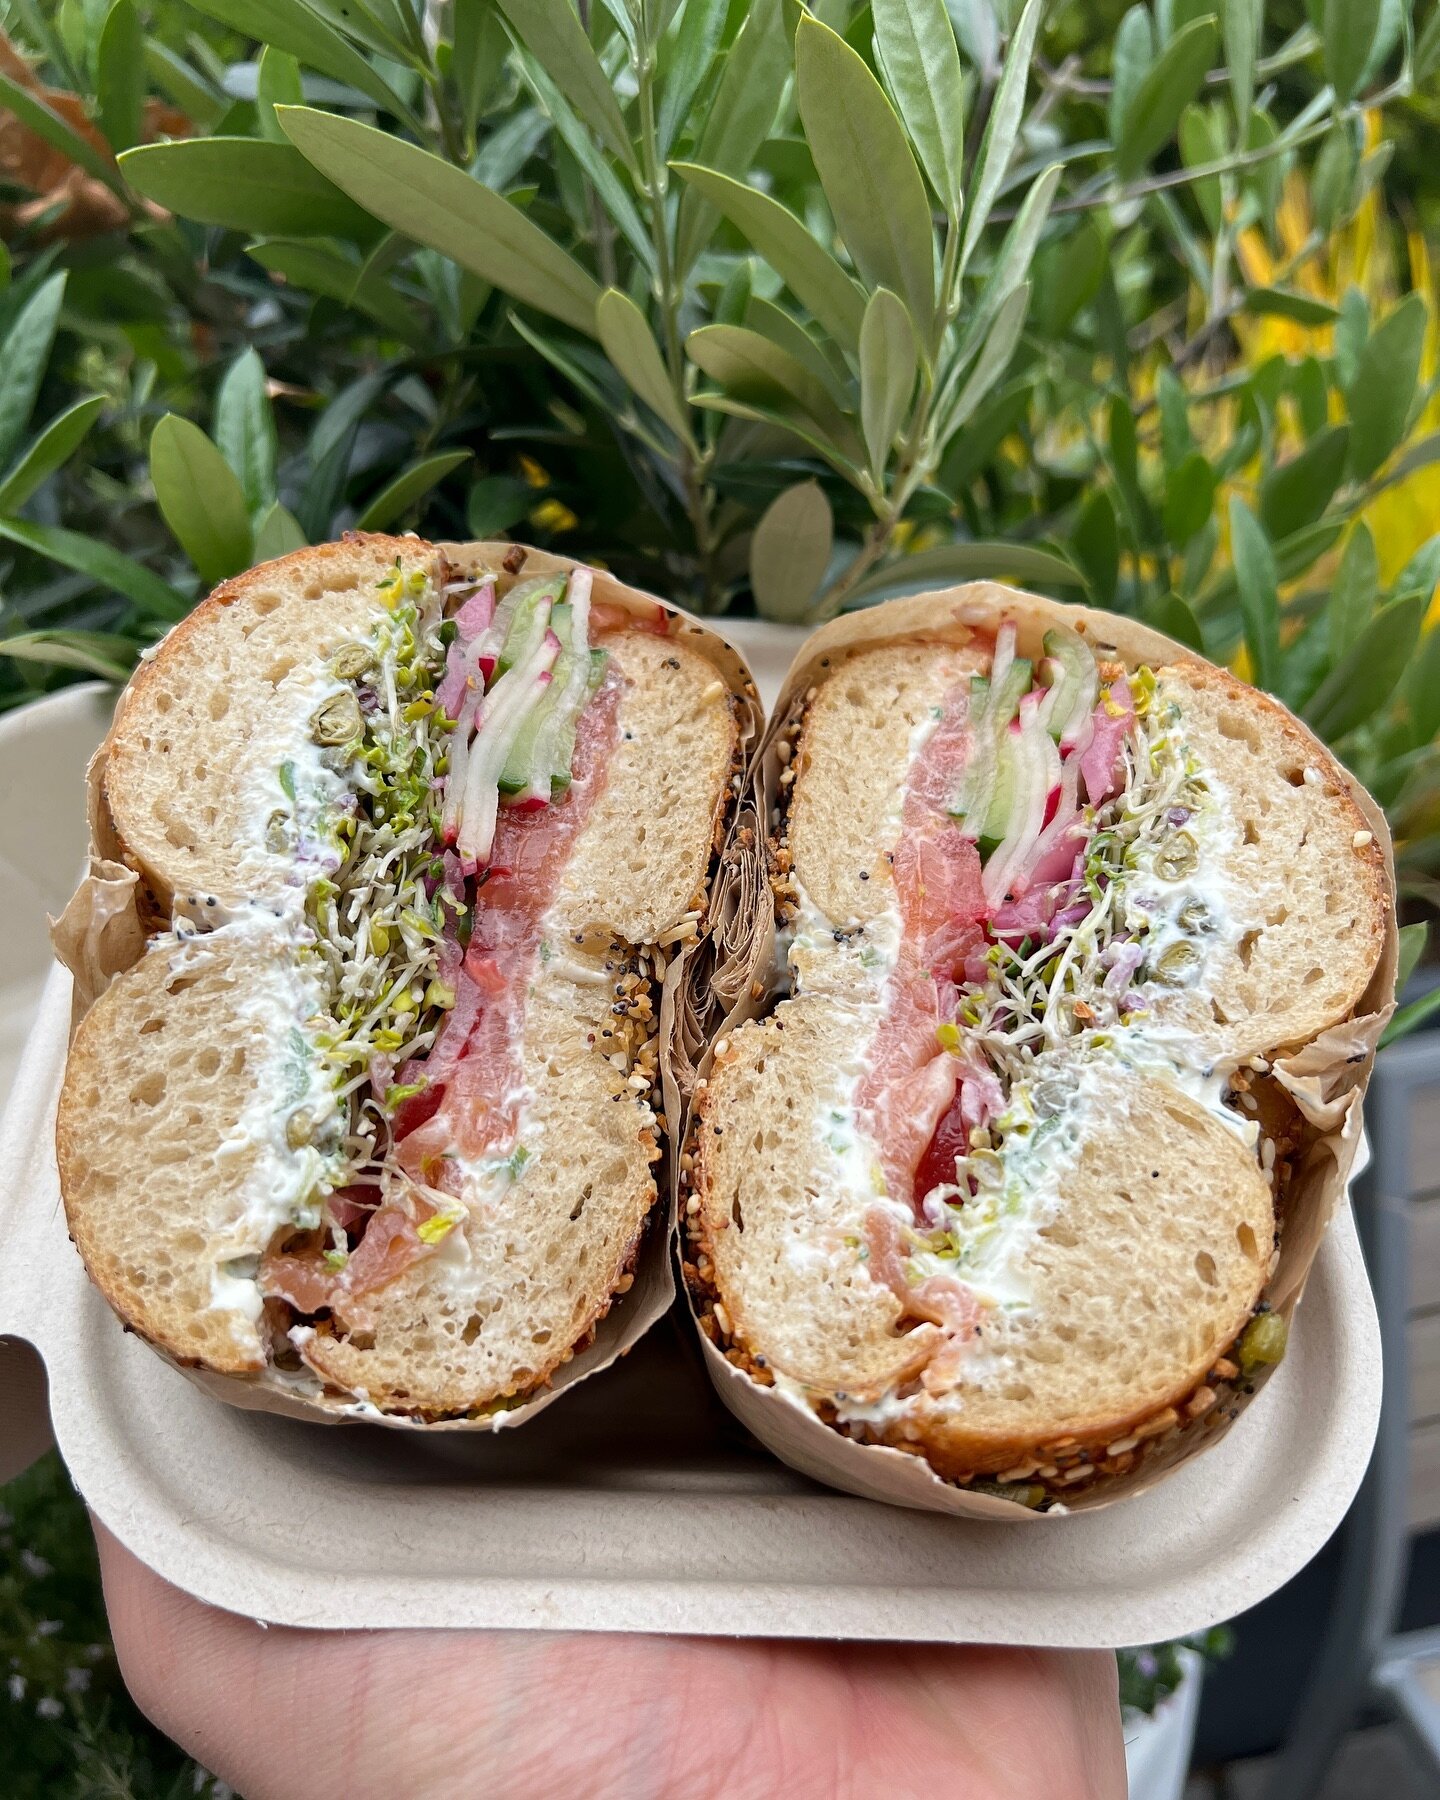 Nothing like the warm feeling of a sunny spring day 🙌🏻🥯🍅
.
When was the last time you ordered a Bob &amp; Larry? We&rsquo;ve got one waiting for you! 
Bagel of Choice, Scallion achieve CC, Valdivia Farms Heirloom Tomatoes, Pickled Onion, Salted C